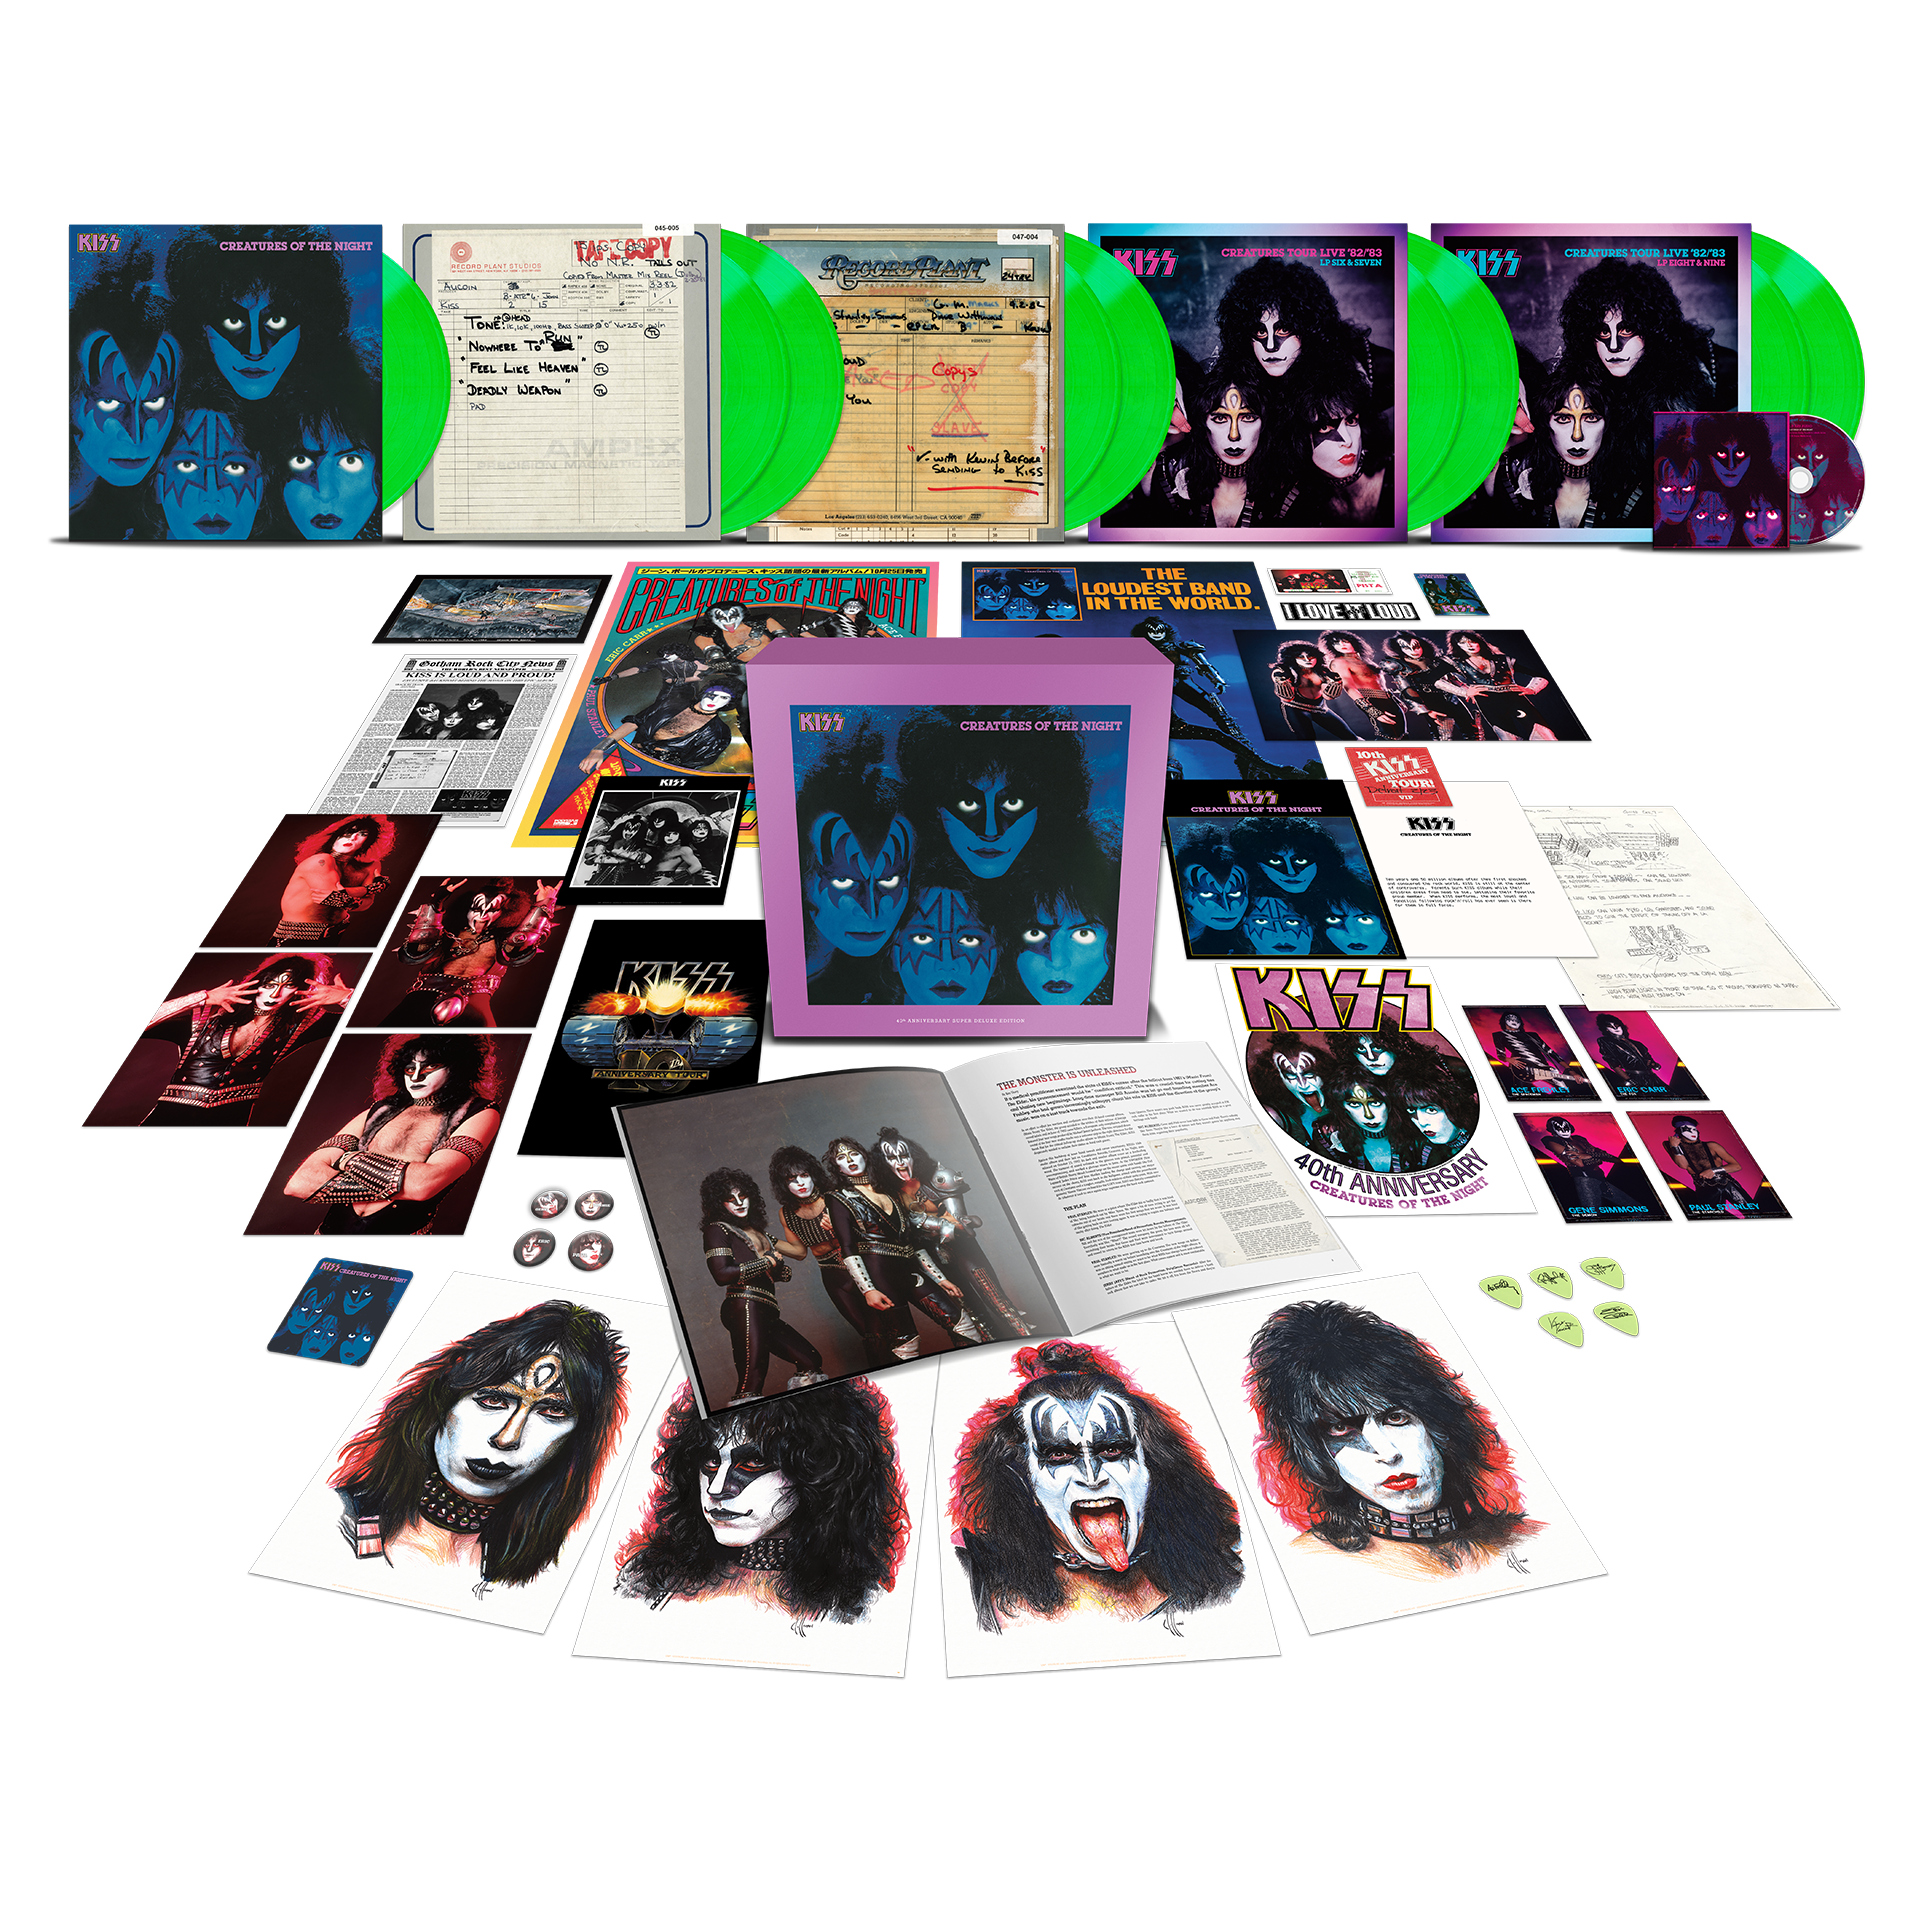 Creatures Tour '82-'83 Longsleeve + Creatures Of The Night 40th Anniversary 9LP Super Deluxe (Limited Edition Glow-In-The-Dark Vinyl) Bundle